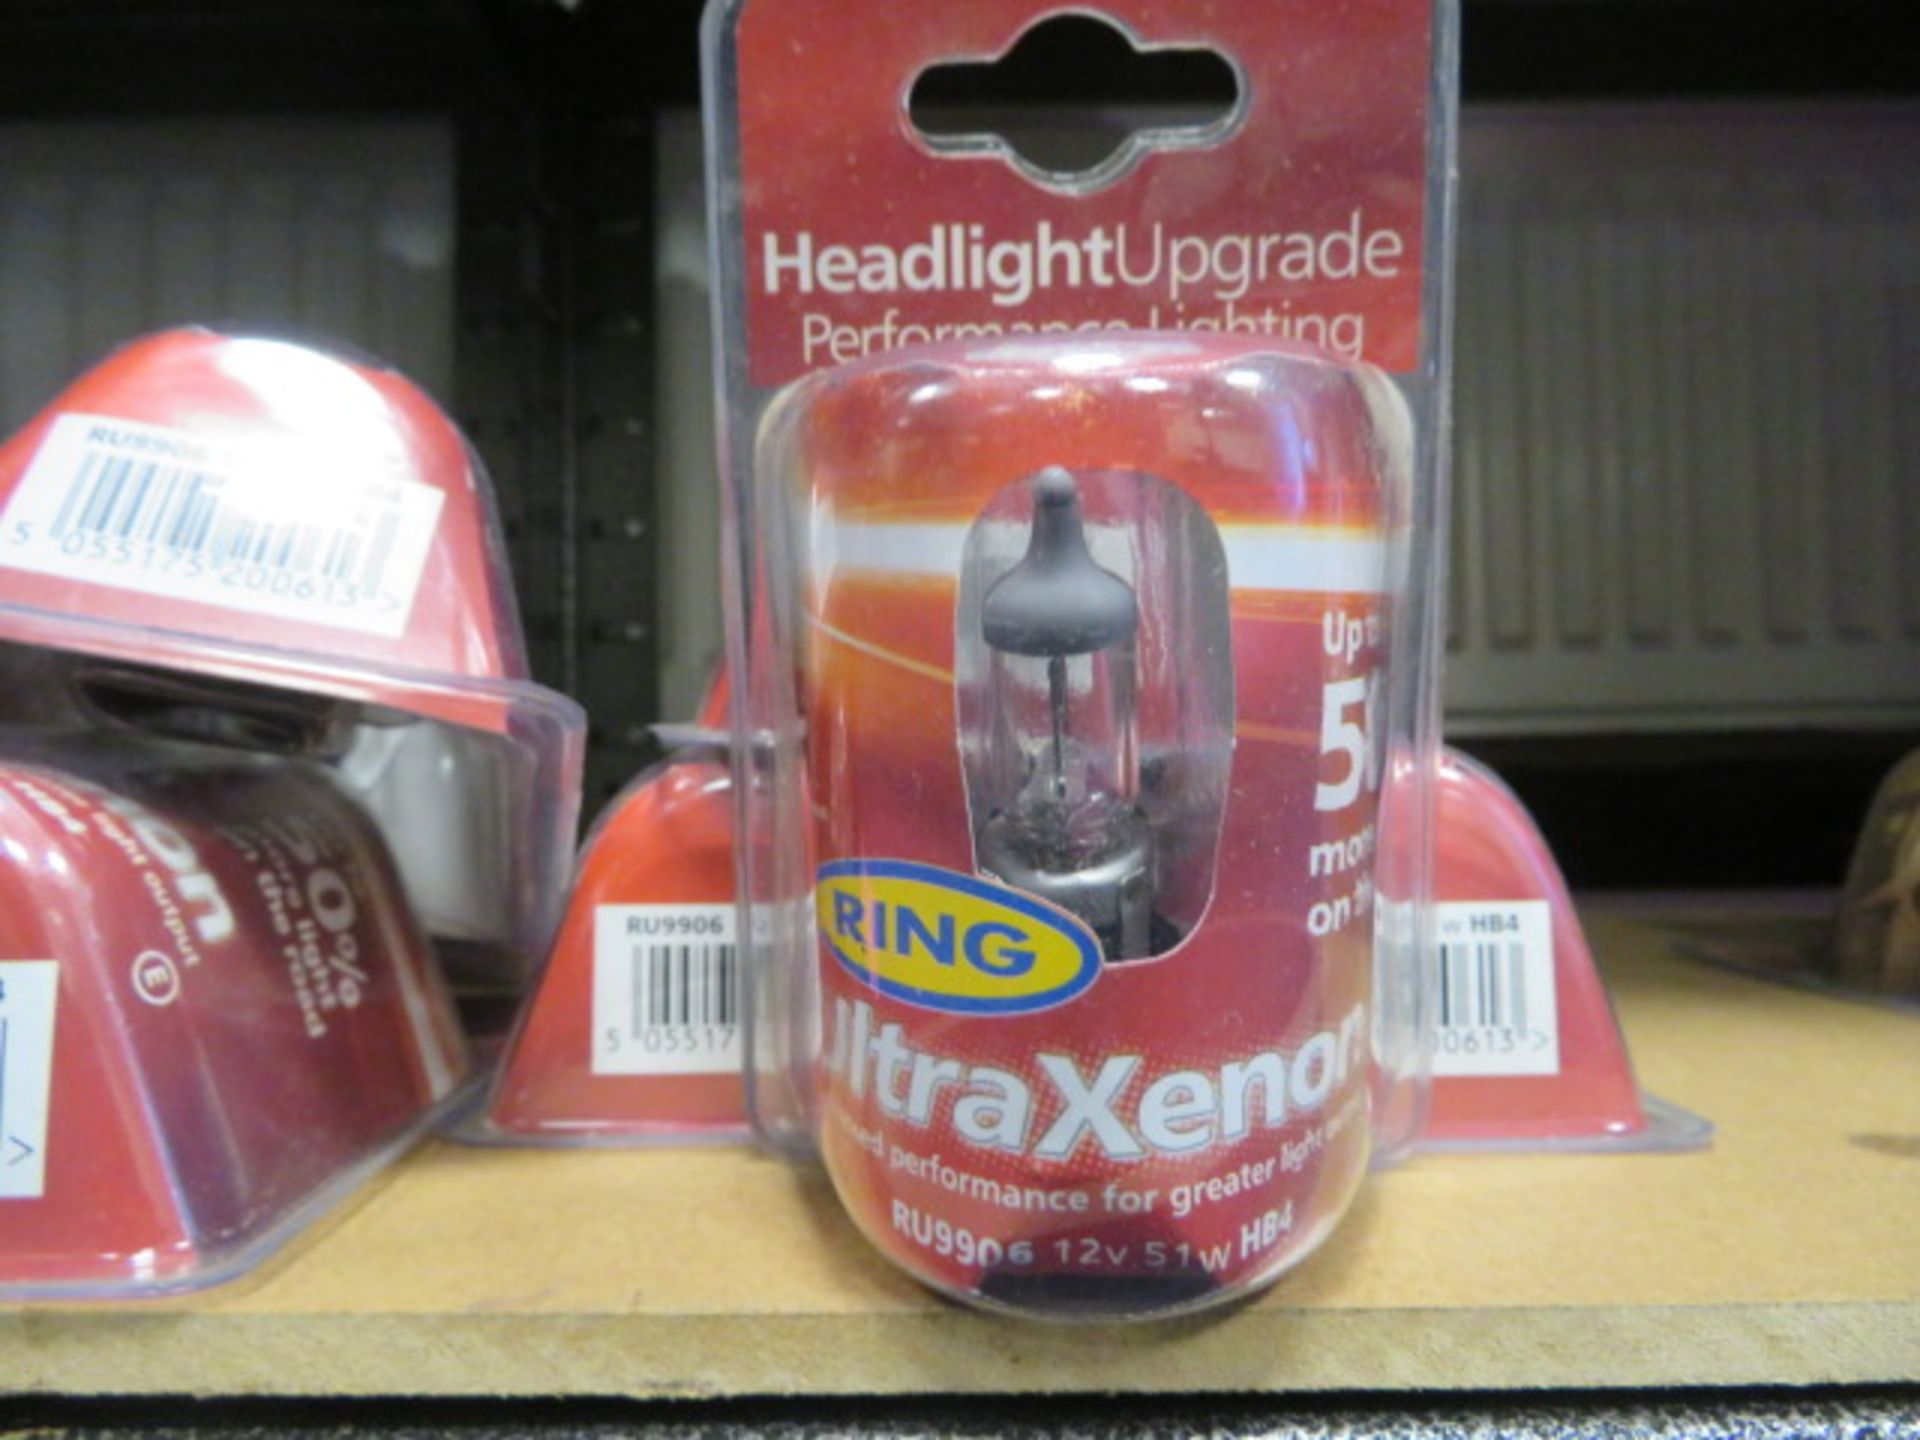 6 X RING ULTRA XENON HEAD LIGHT BULB HB4. UK DELIVERY AVAILABLE FROM £14 PLUS VAT. HUGE RE-SA...